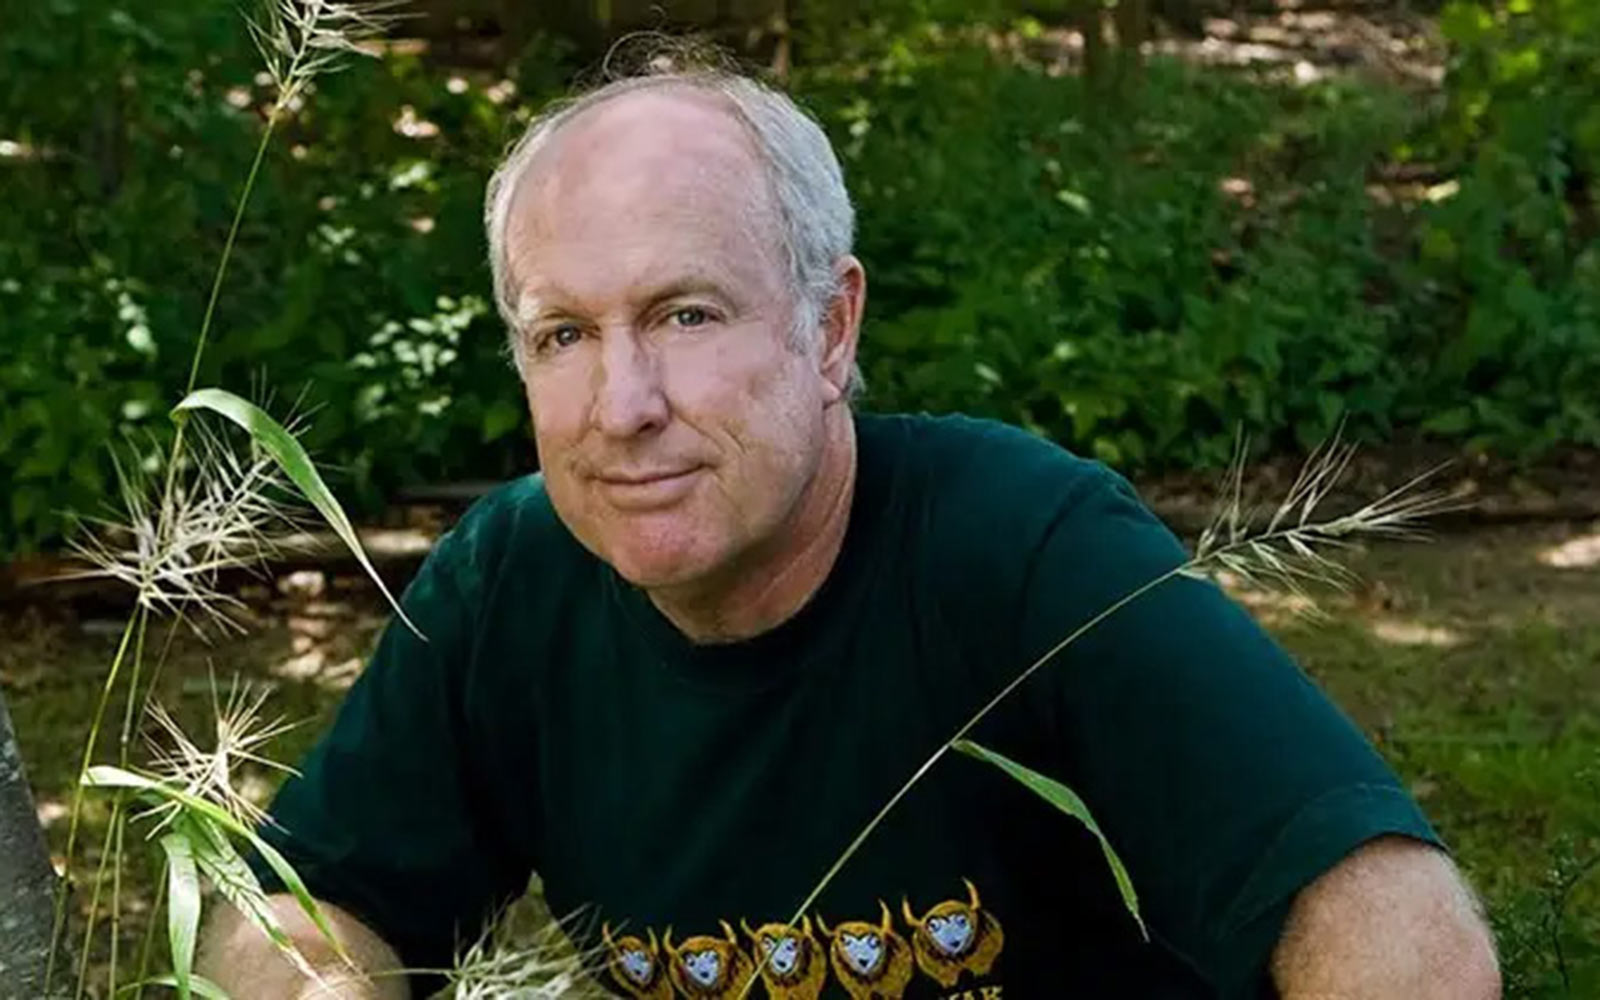 Award-winning ecology author to open Bogan Lecture Series for MSU’s landscape architecture department